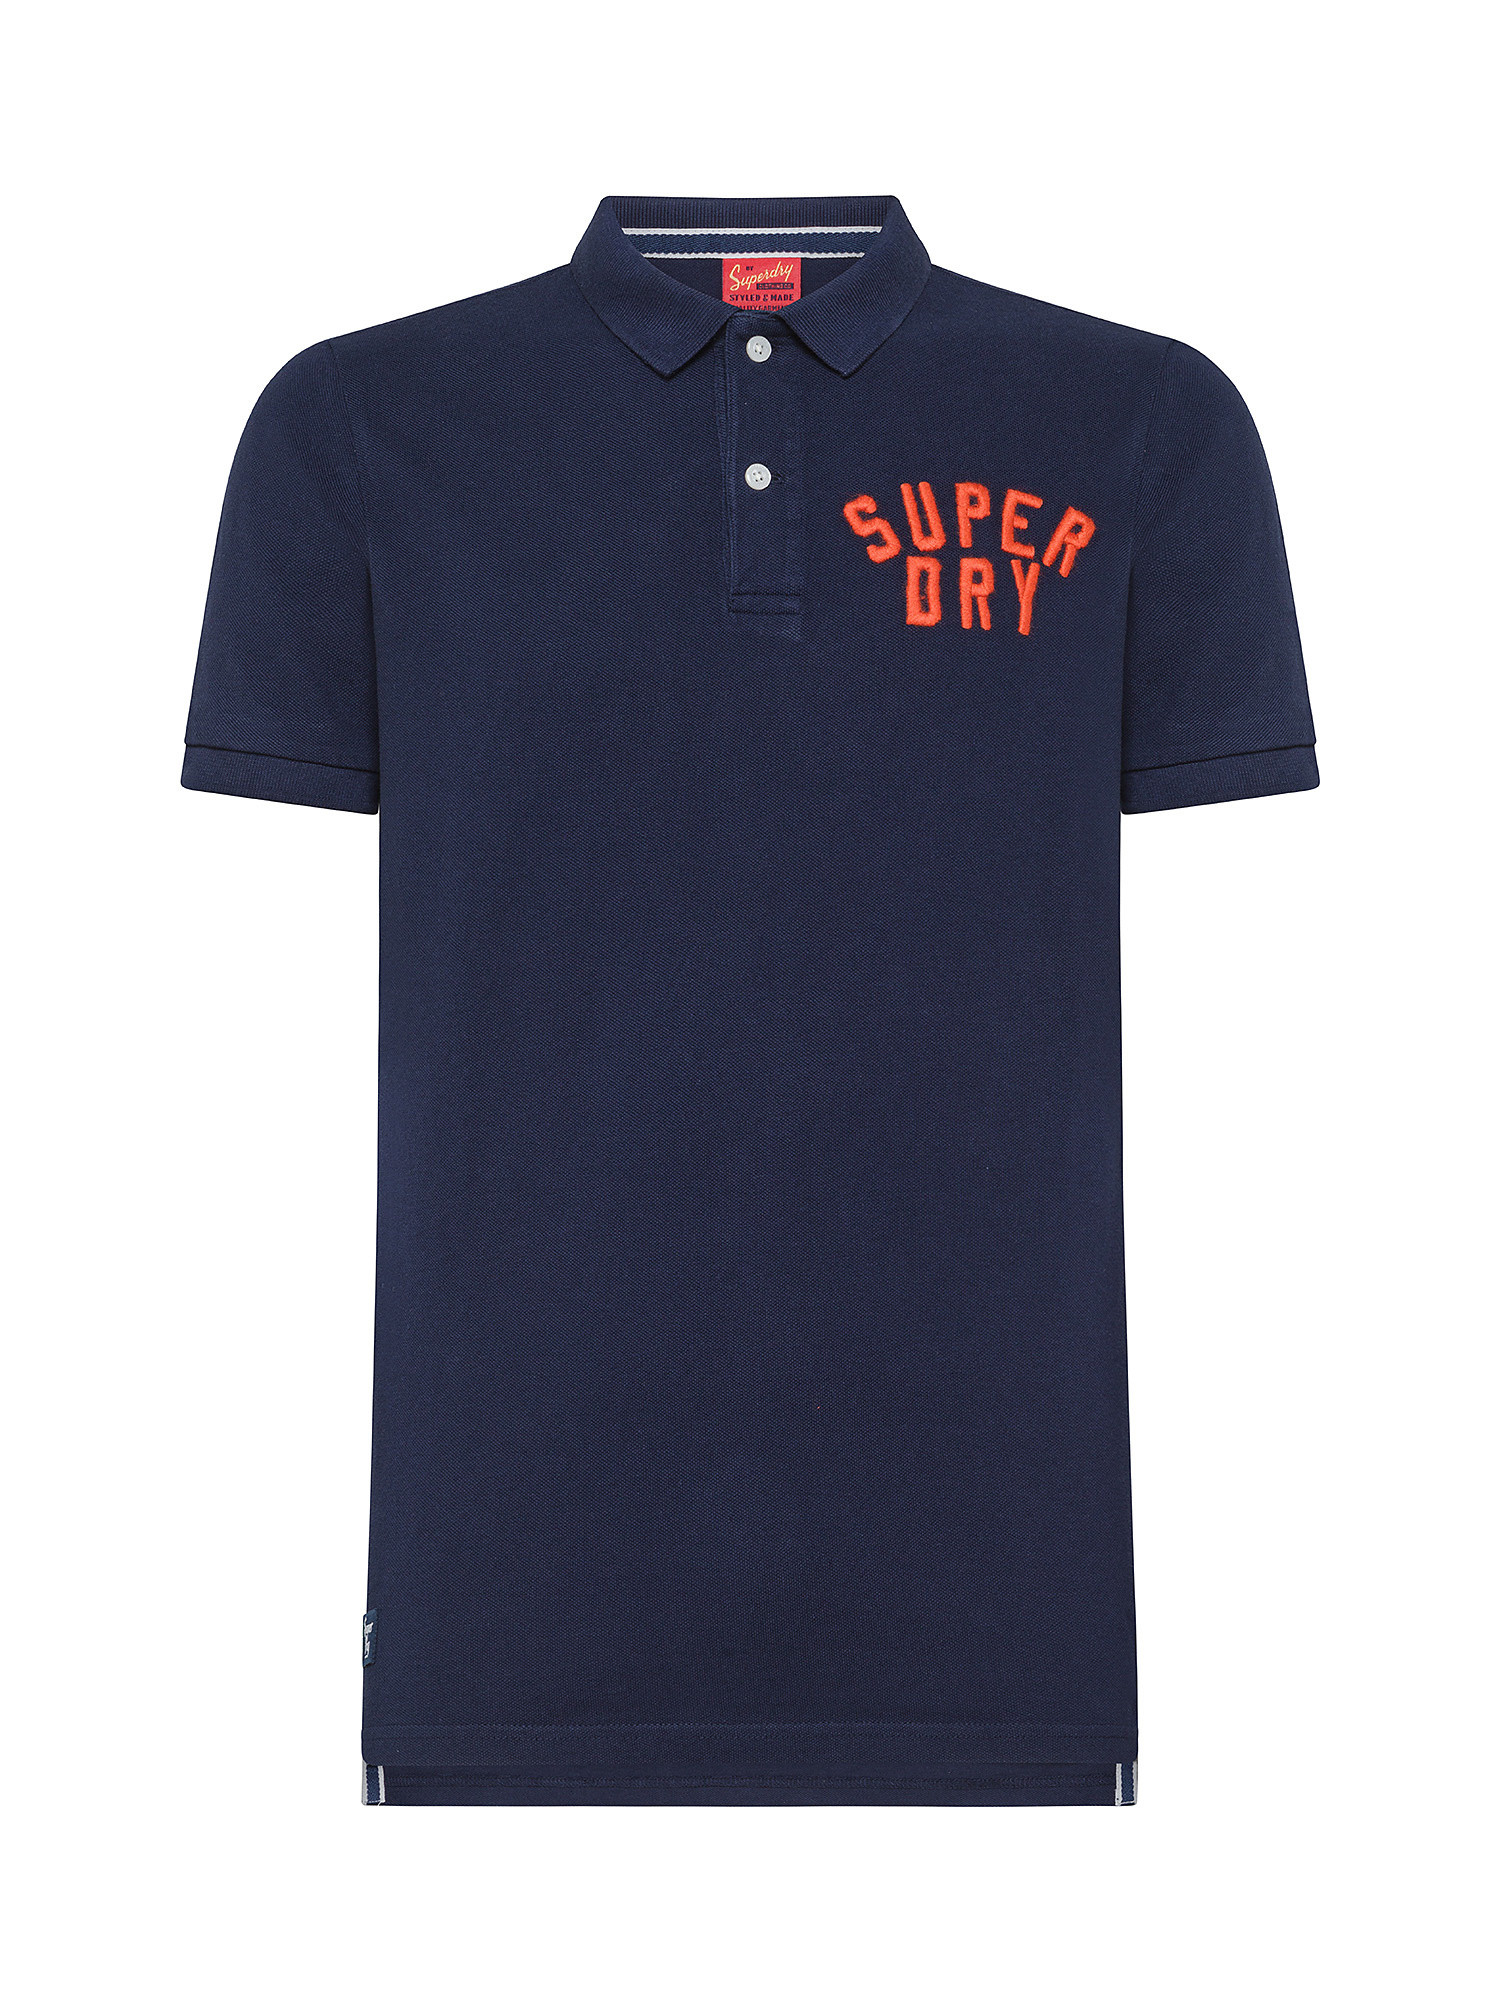 Superdry - Cotton piqué polo shirt with logo, Blue, large image number 0